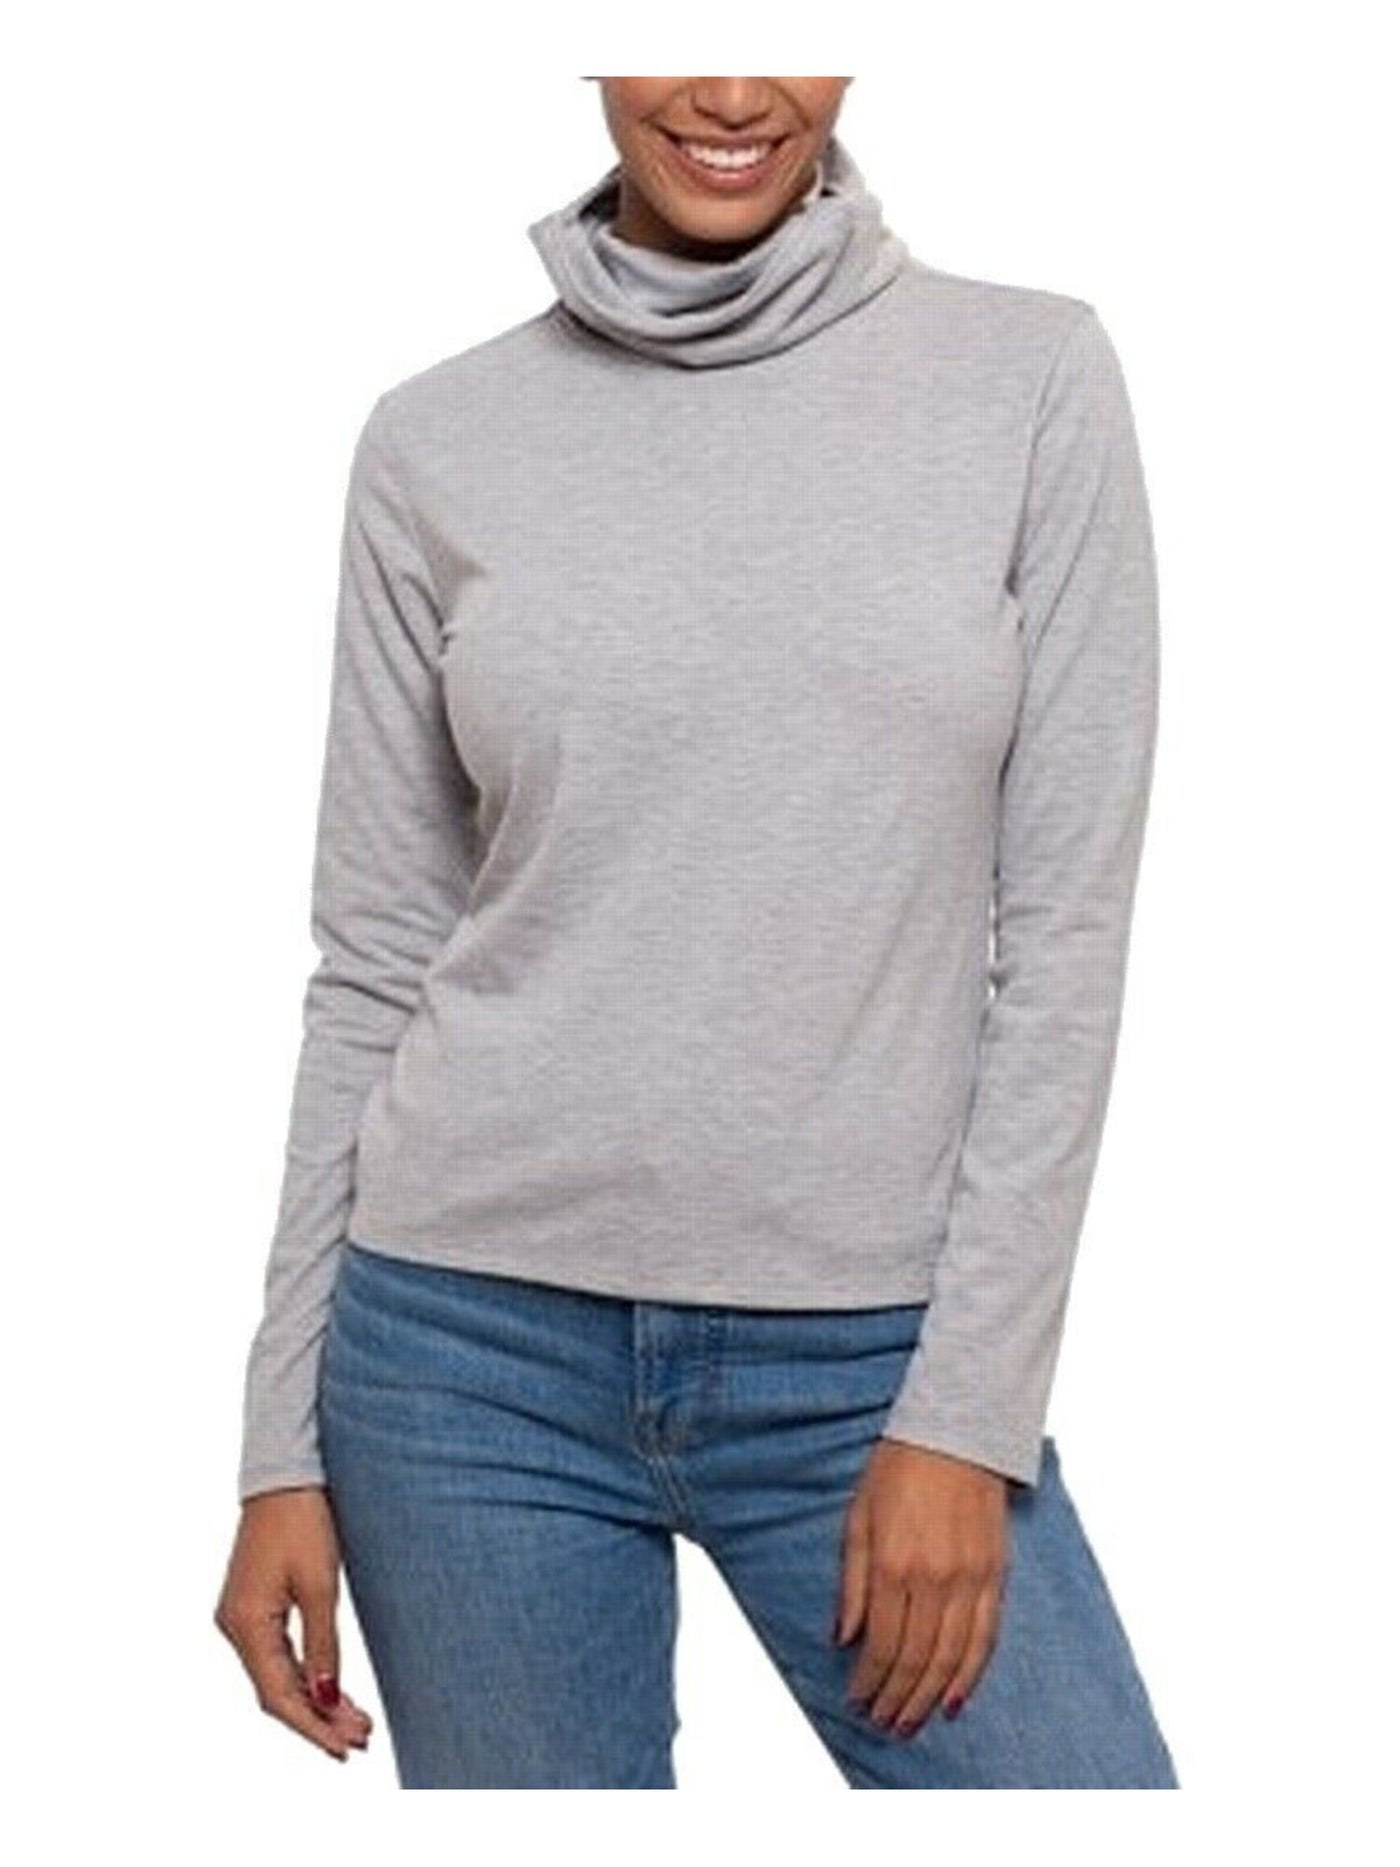 BAM BY BETSY & ADAM Womens Gray Cotton Blend Attached Face Mask Long Sleeve Crew Neck Top XL